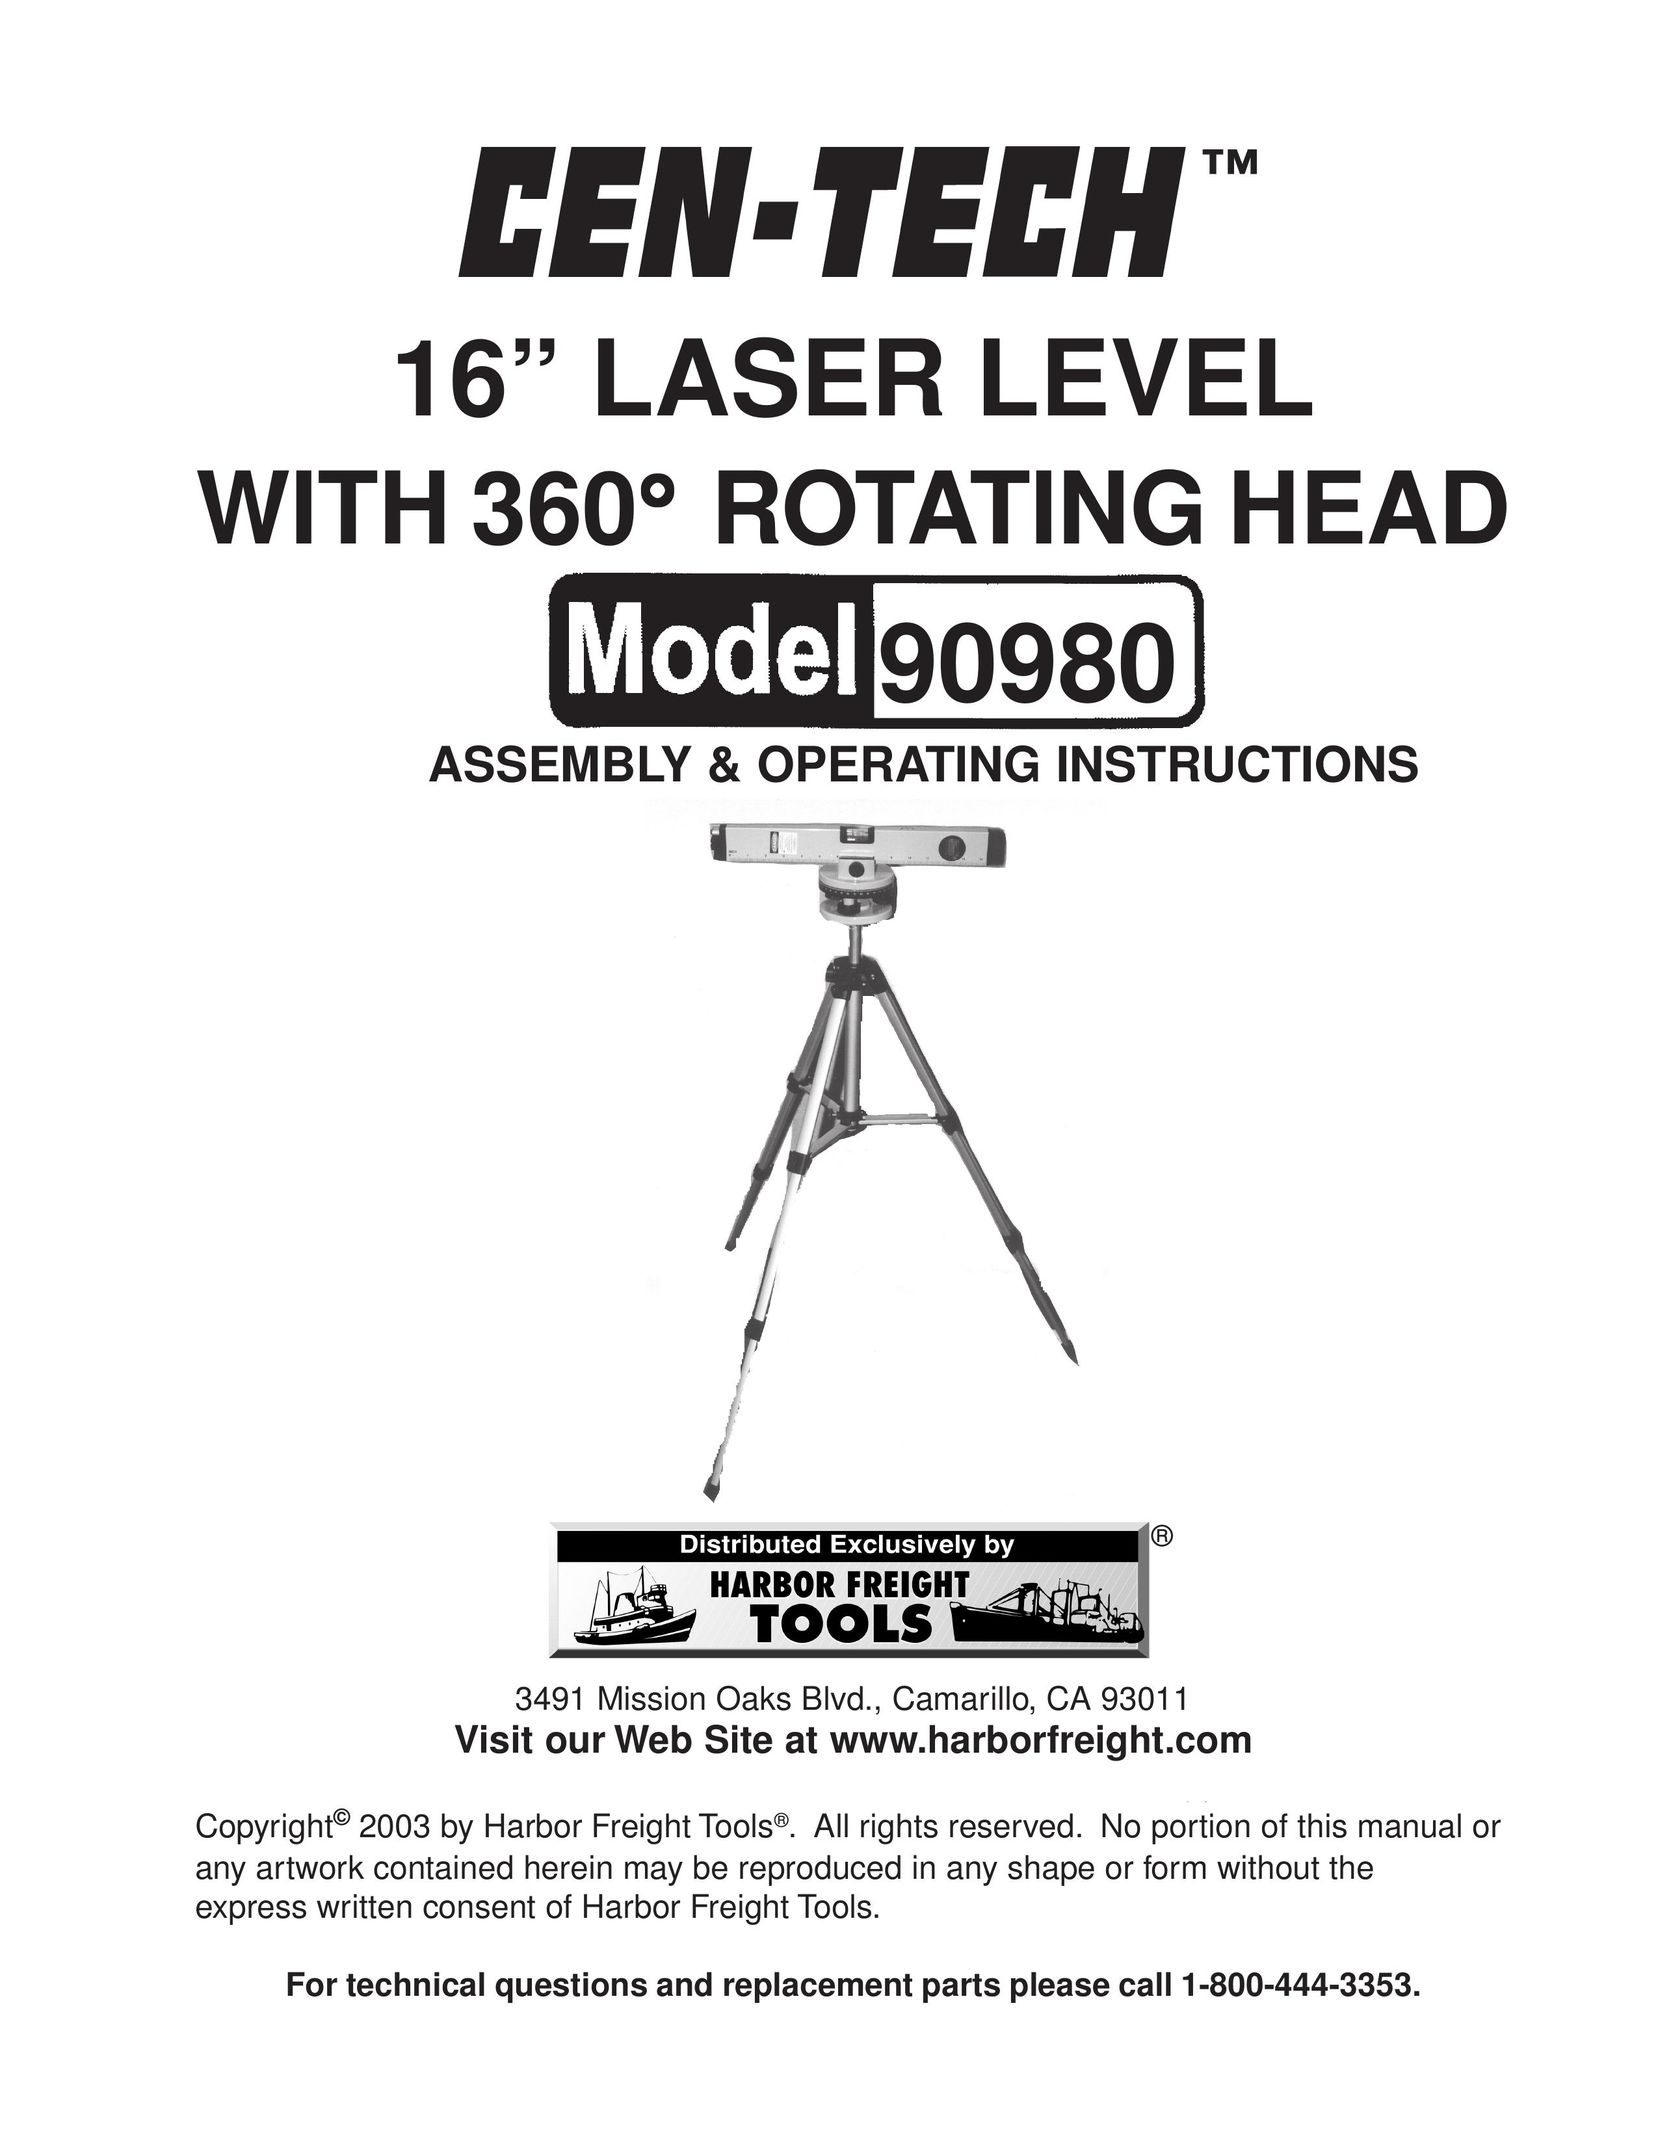 Harbor Freight Tools 90980 Laser Level User Manual